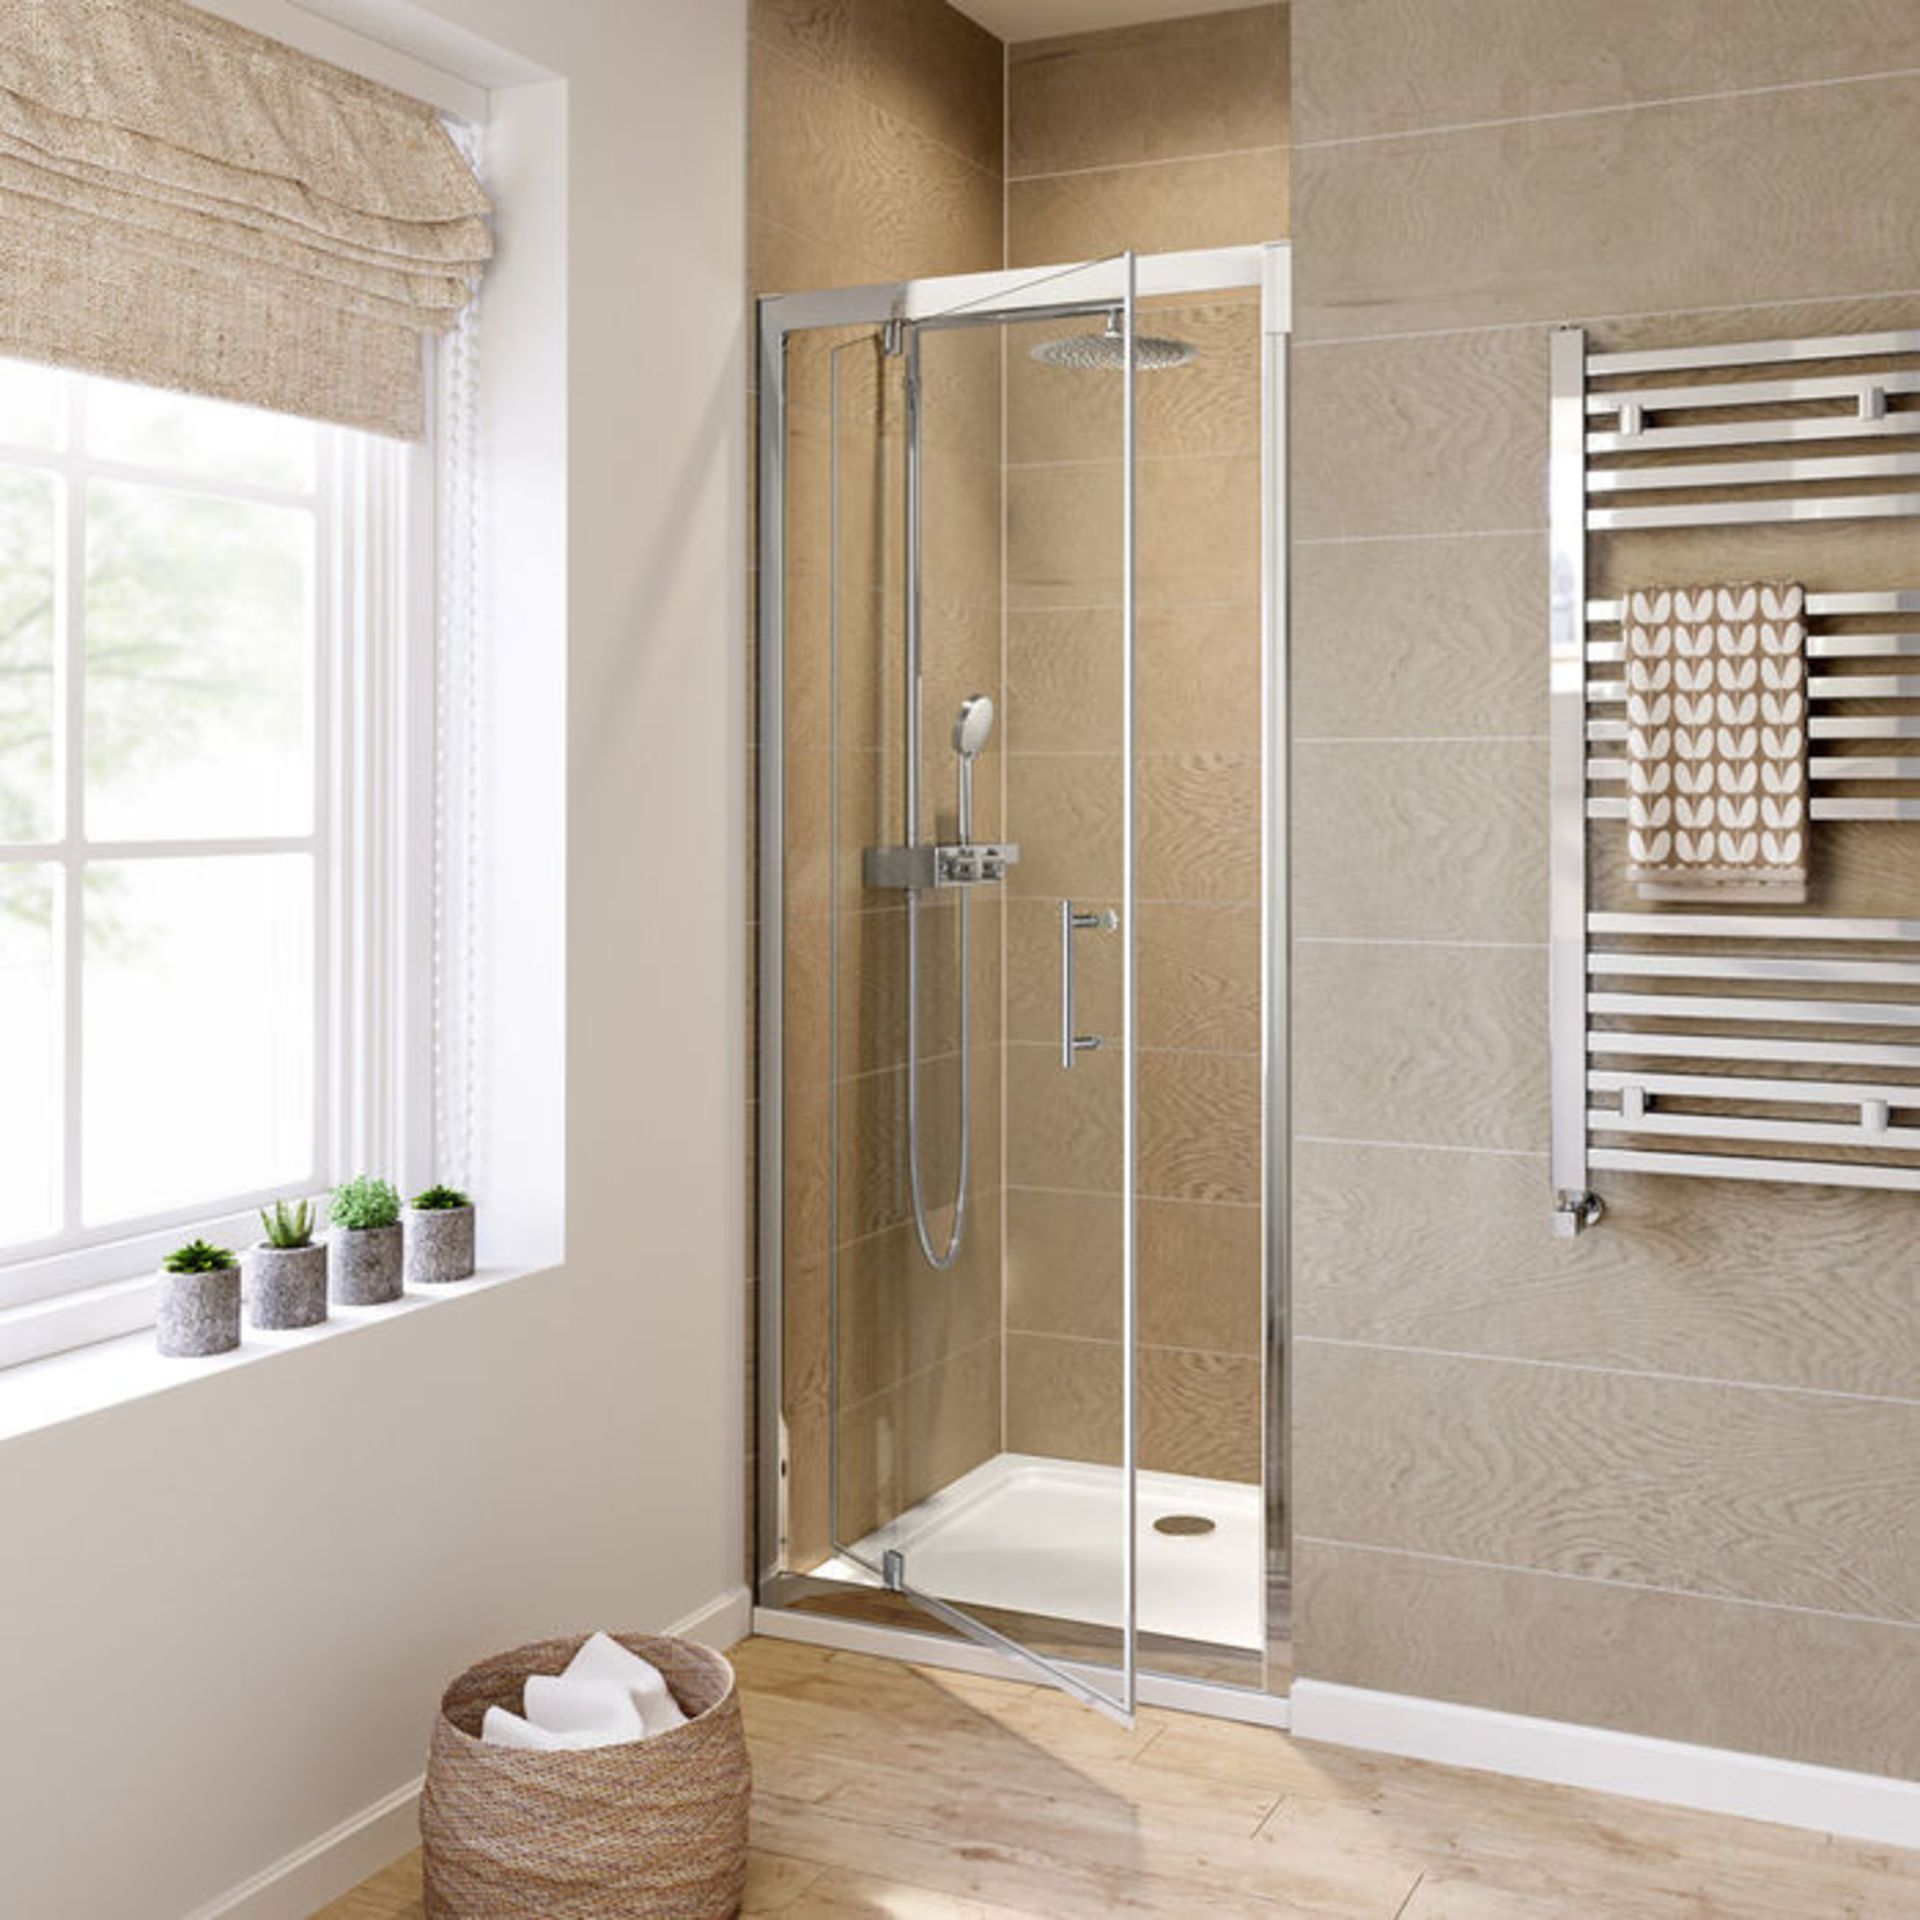 NEW Twyfords 700mm - 6mm - Premium Pivot Shower Door. RRP £299.99.8mm Safety Glass Fully - Image 2 of 2